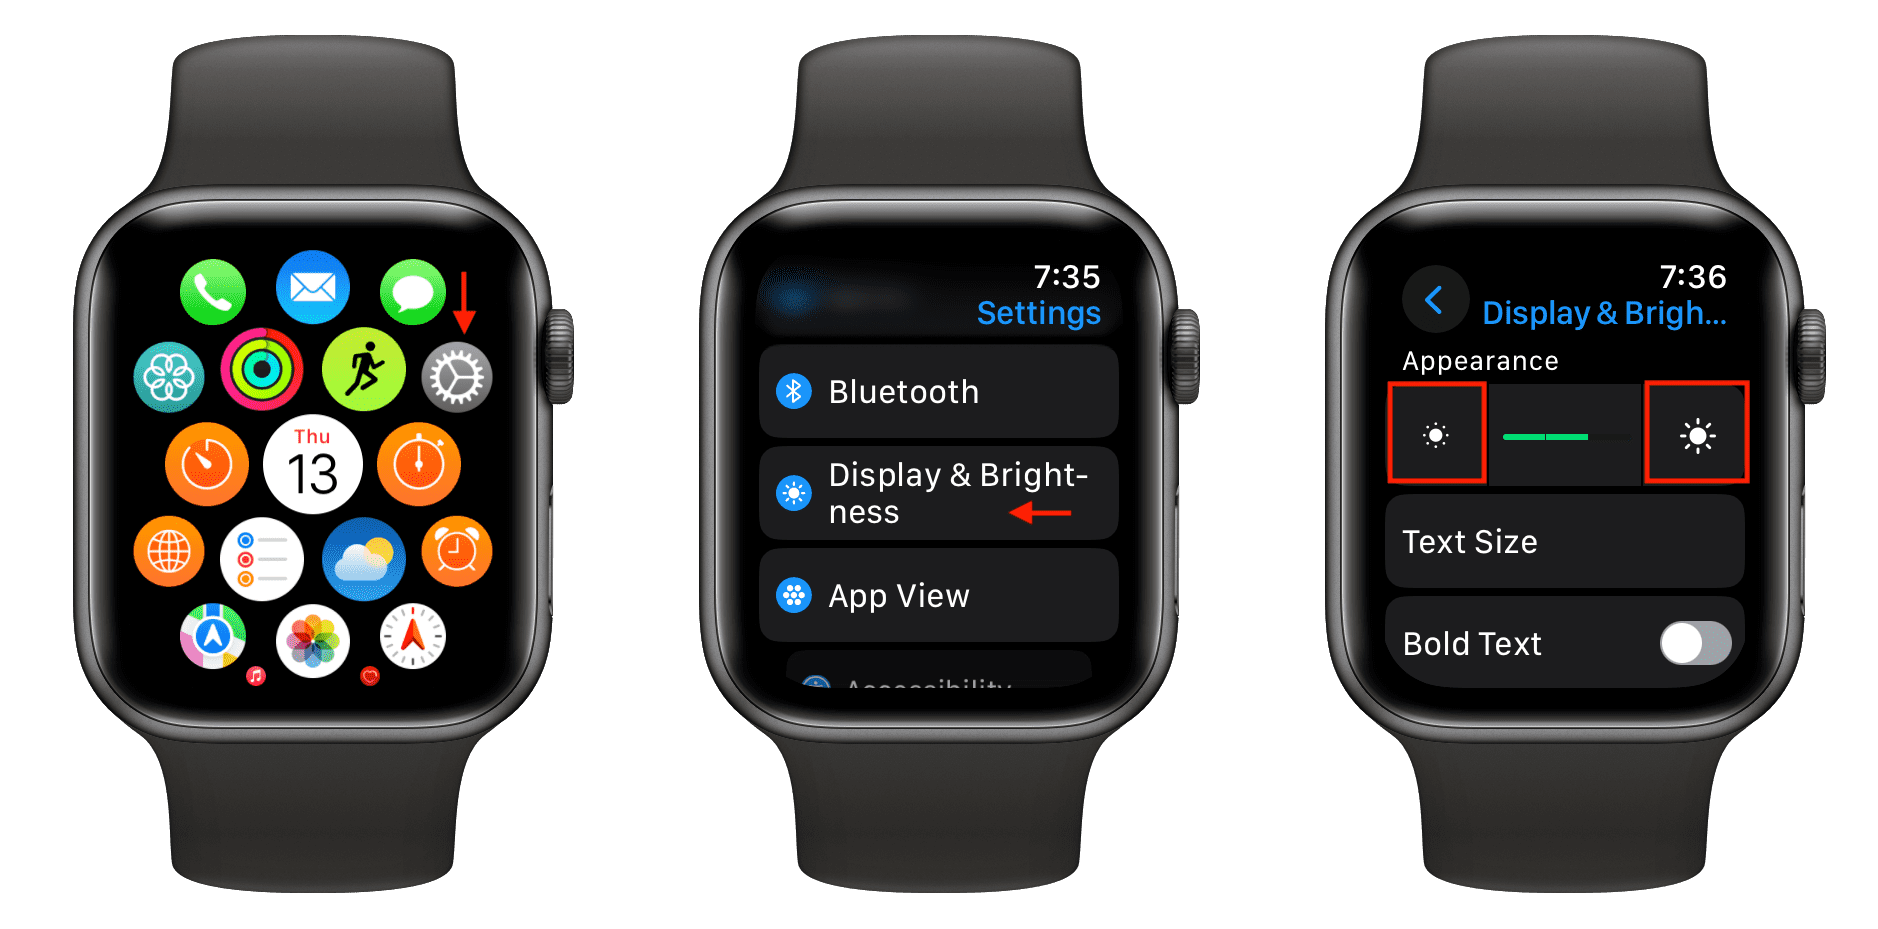 Change Apple Watch screen brightness from its display settings